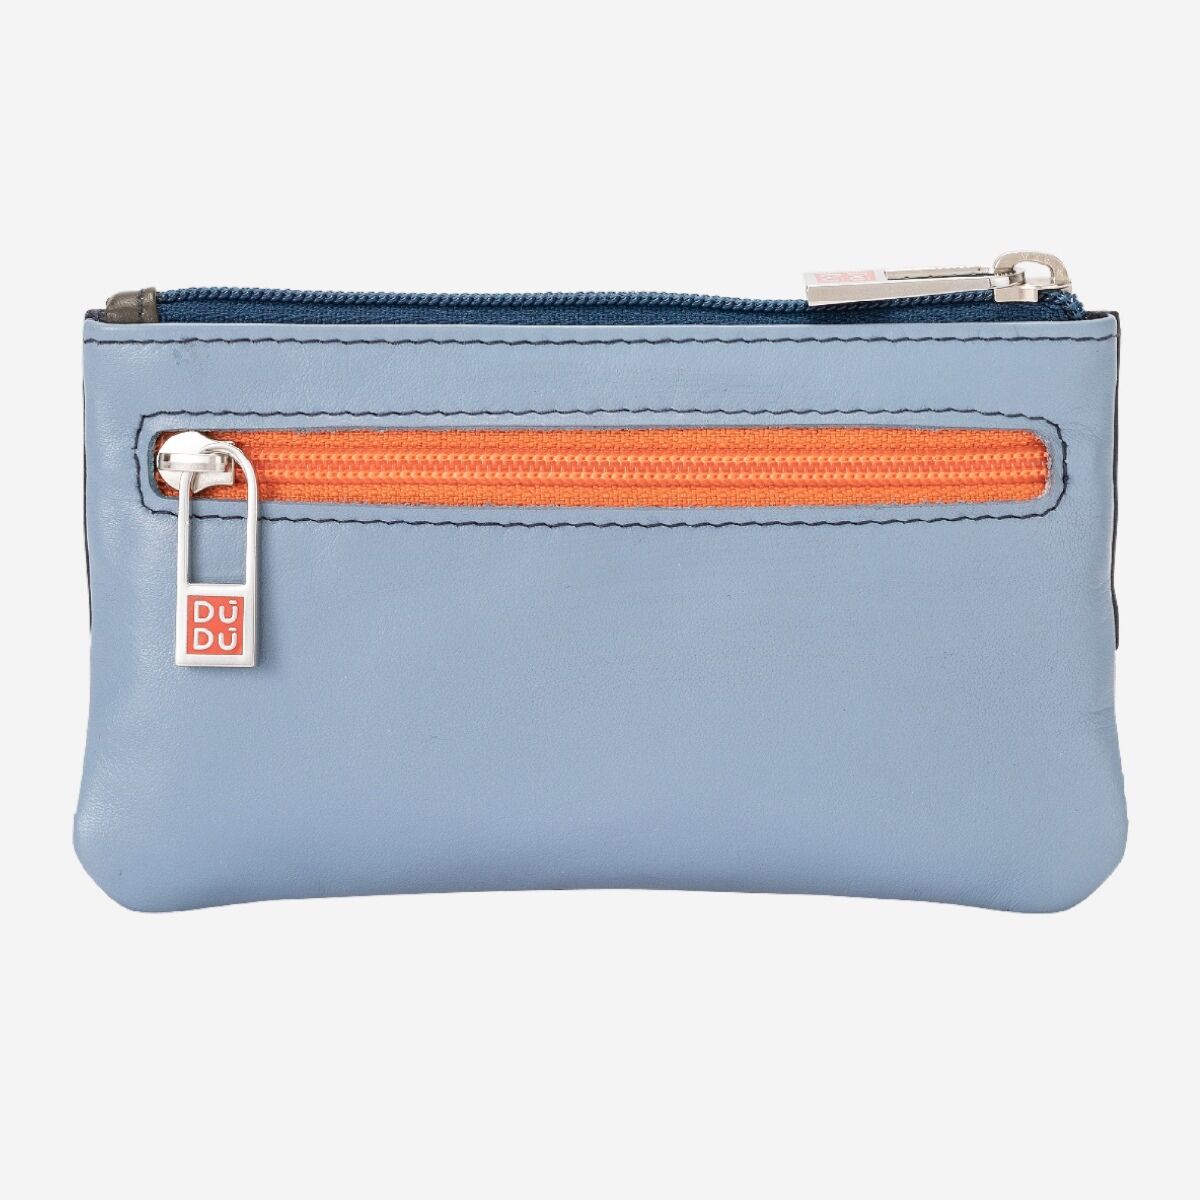 DuDu Leather Coin Purse - Blue/Red